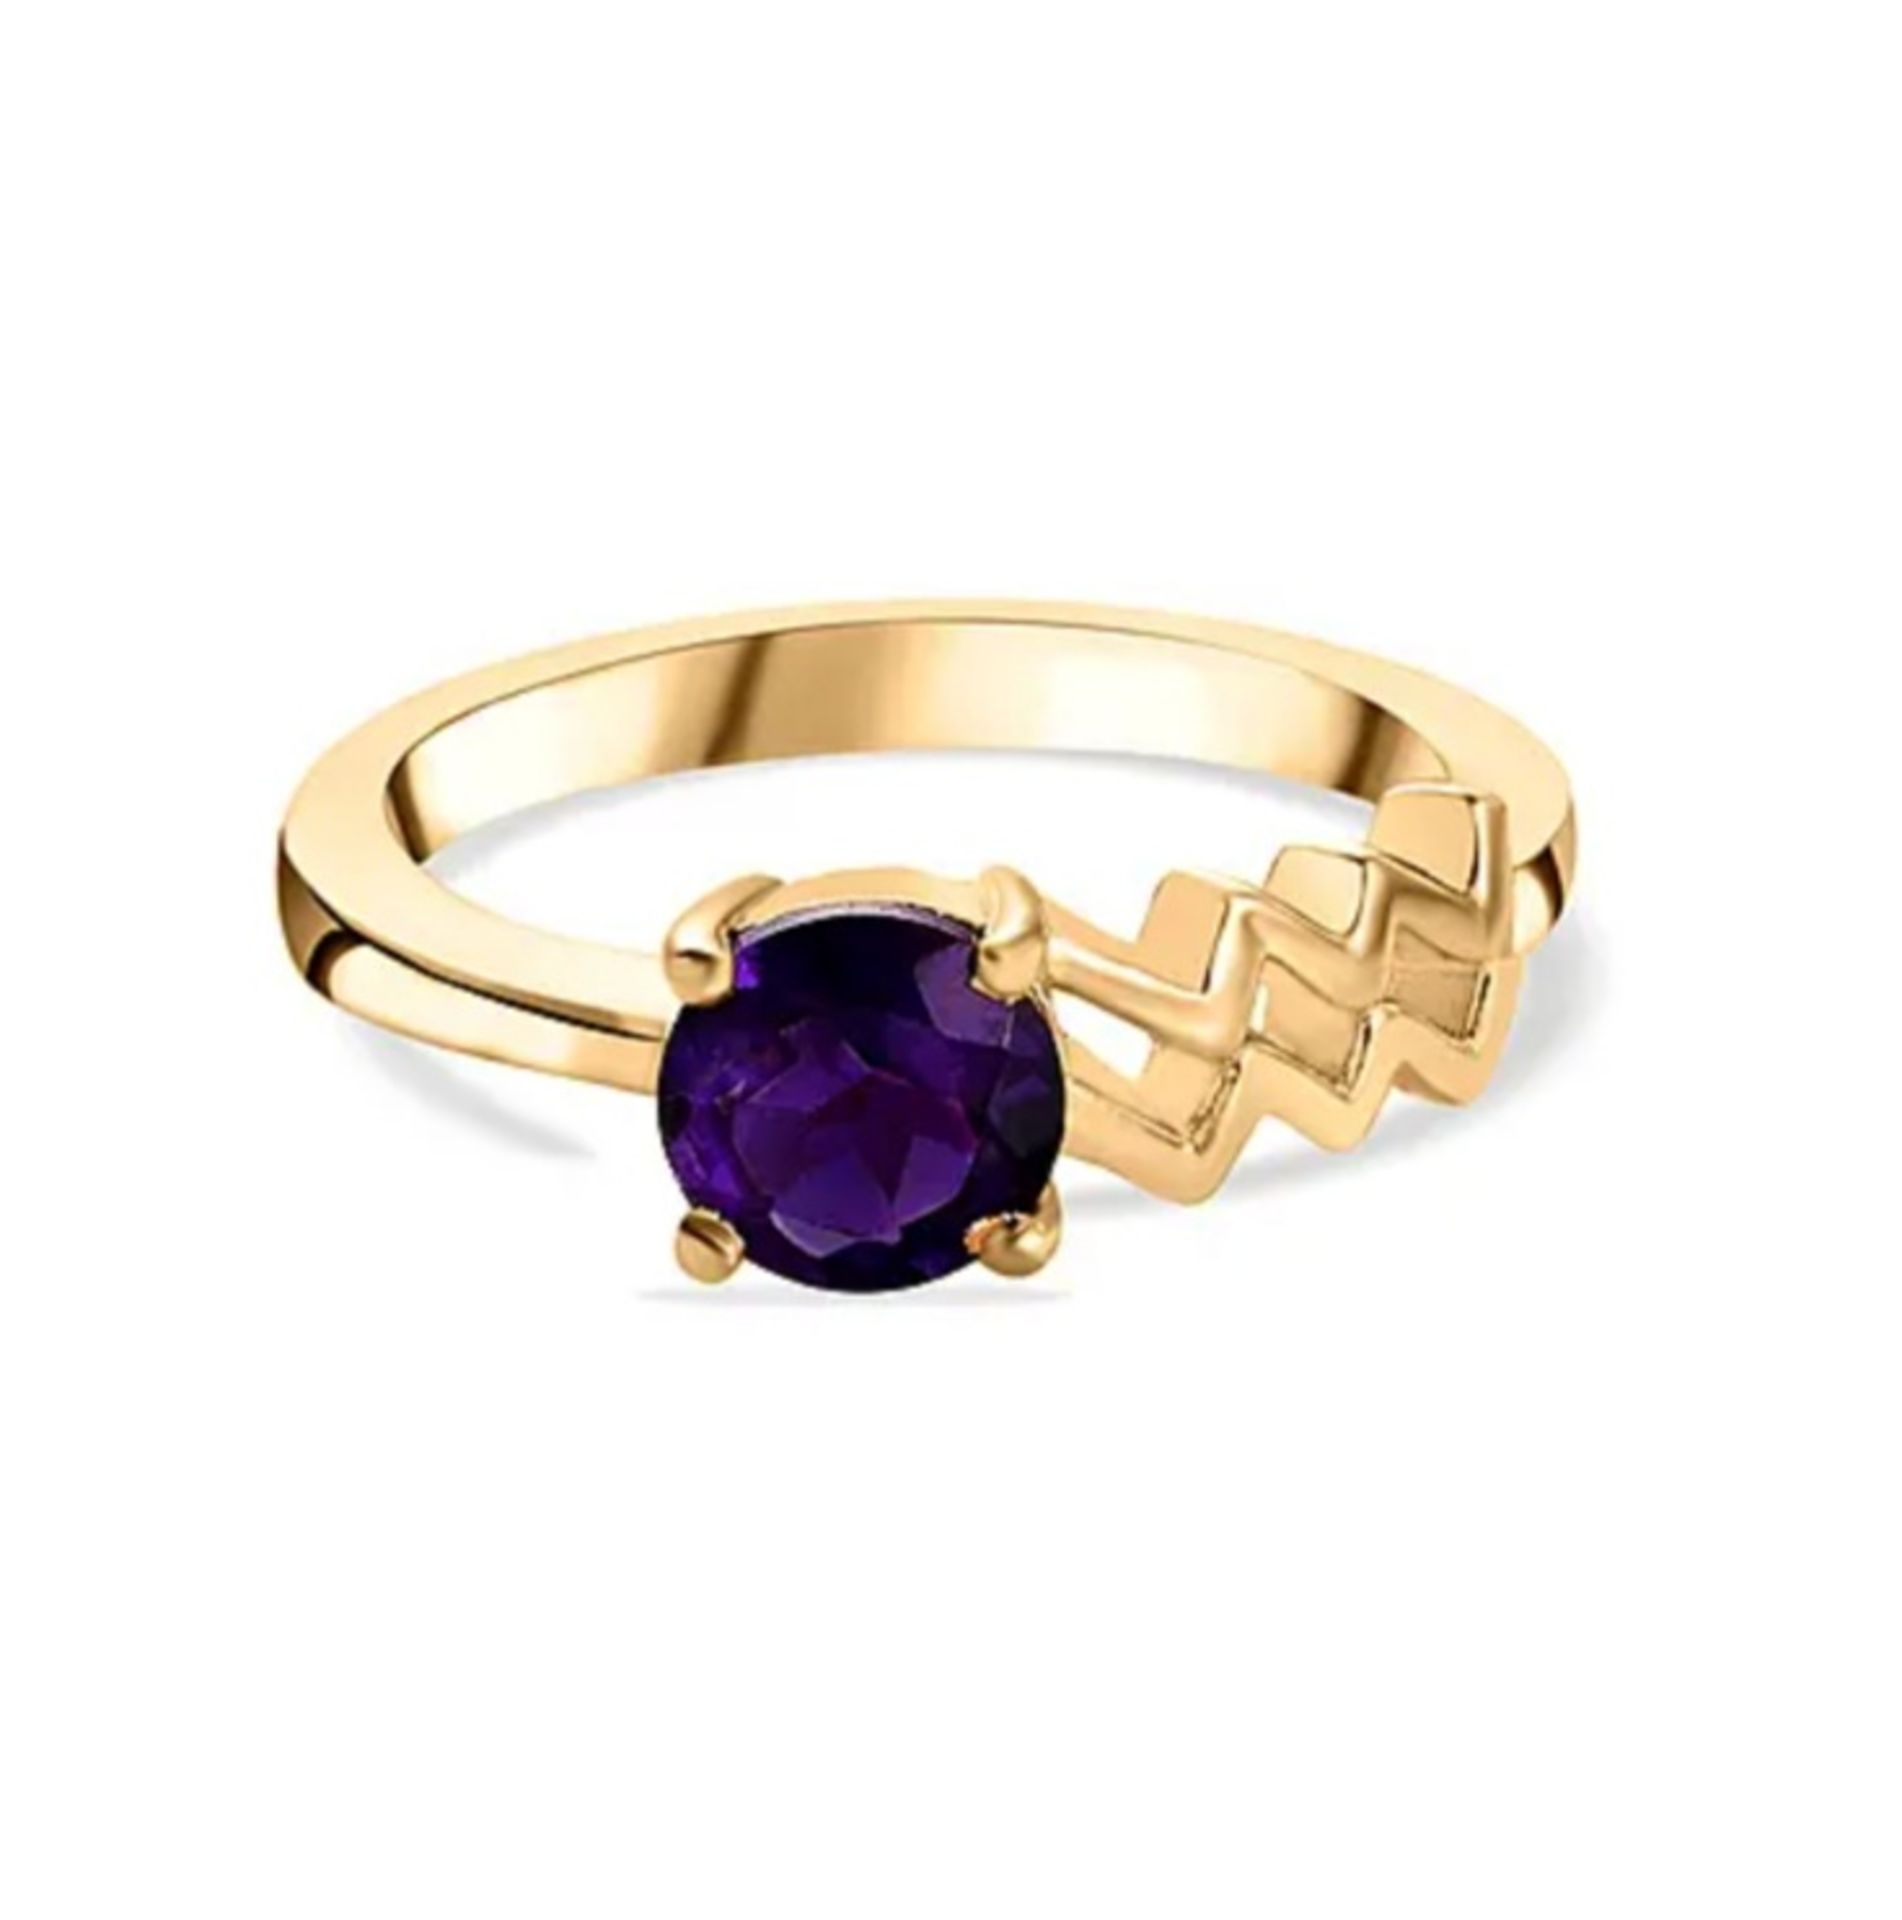 NEW! AA Amethyst Zodiac - Aquarius Ring in 14K Gold Overlay Sterling Silver - Image 3 of 5